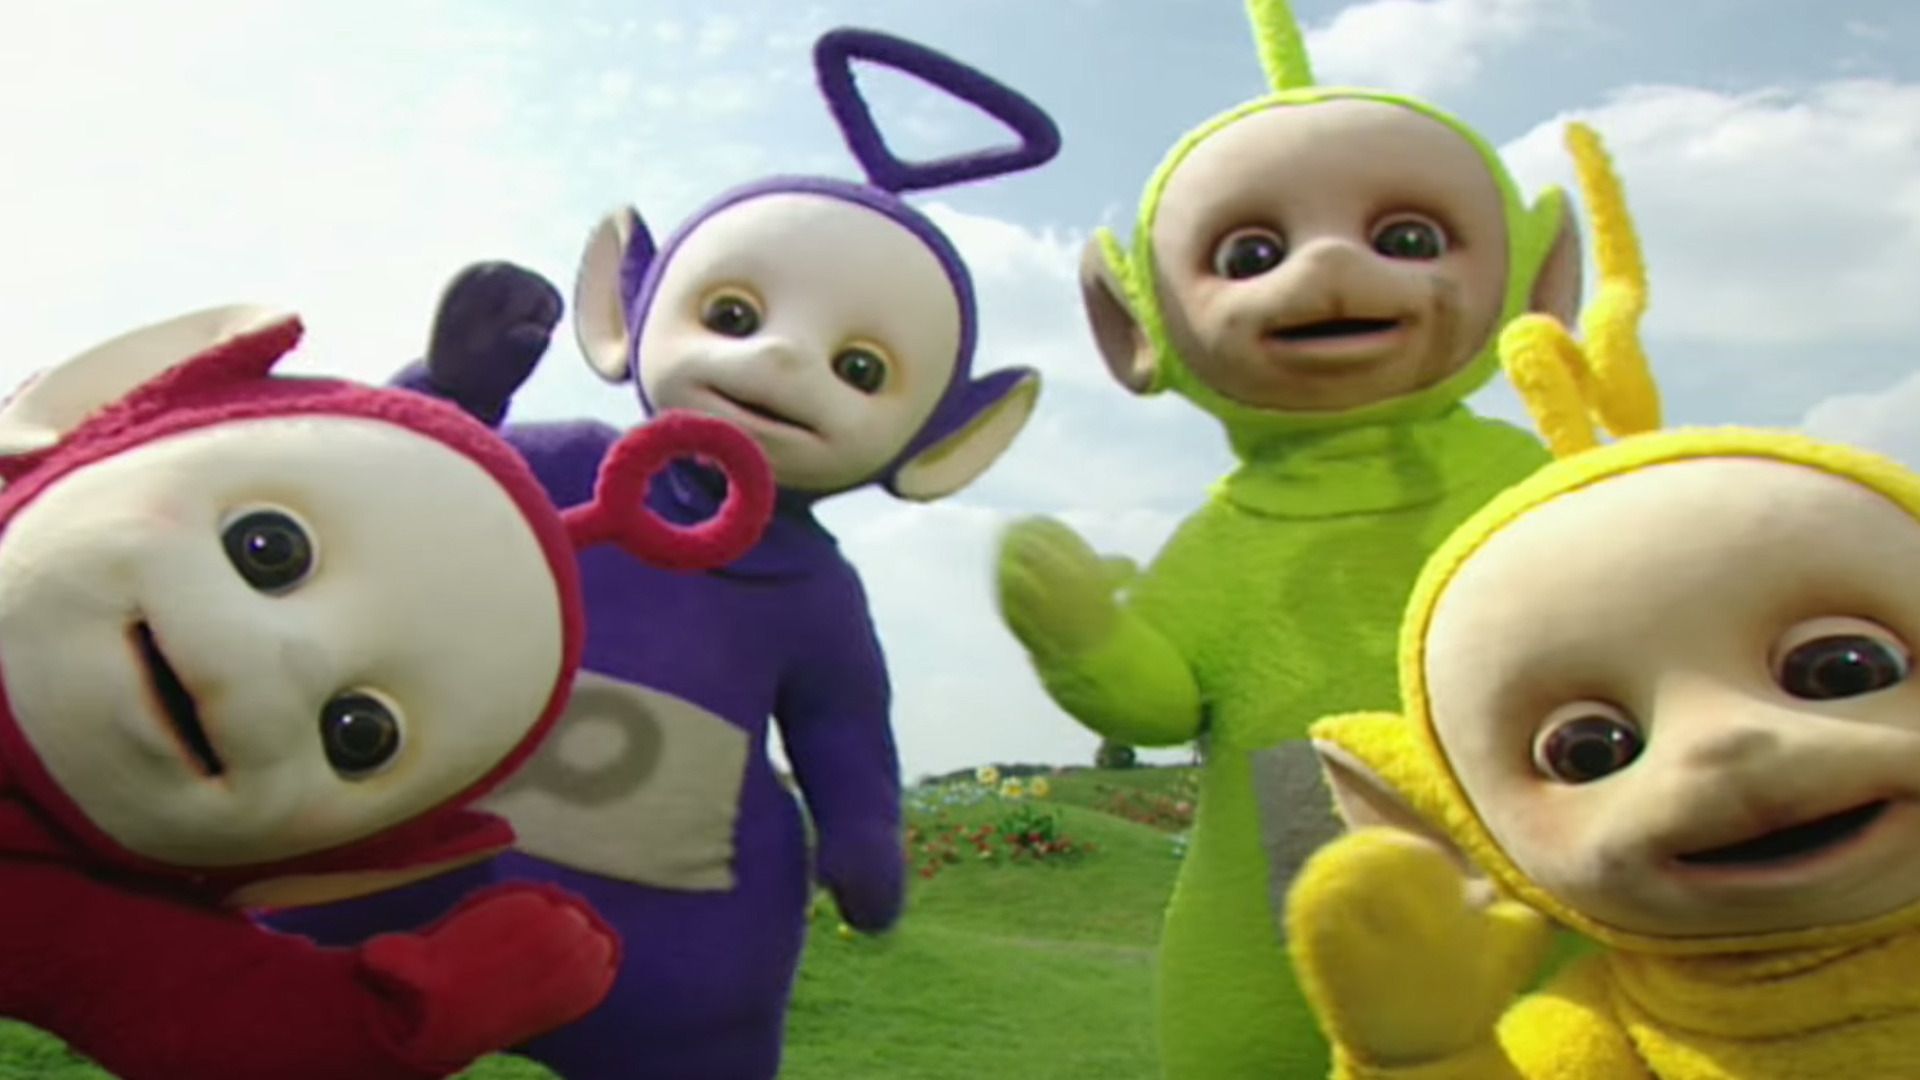 Man in Teletubby costume breaks into home, stea the popurls